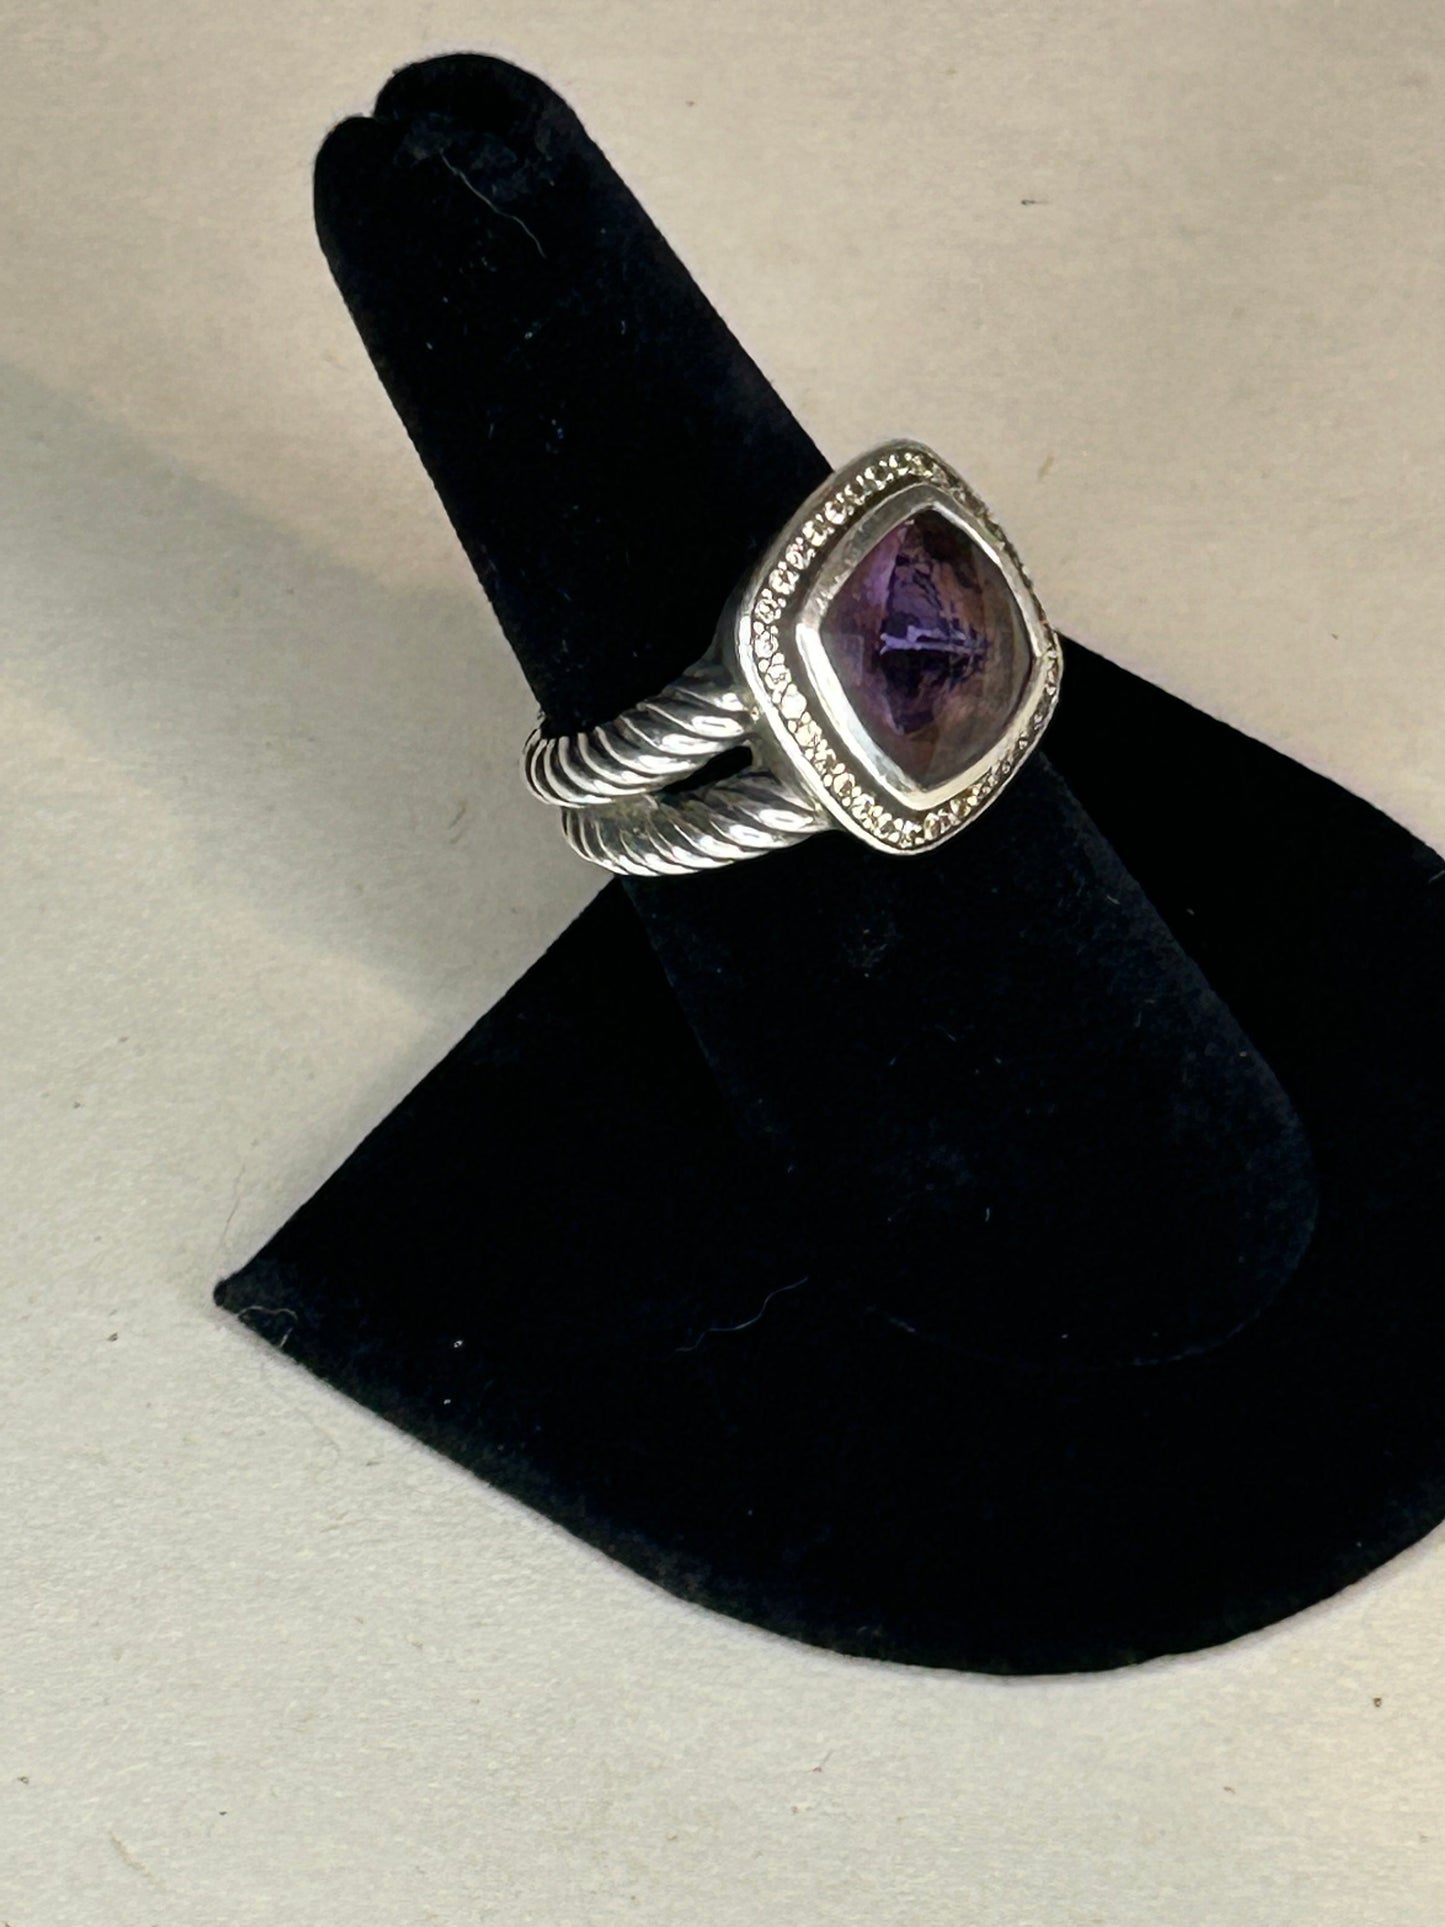 One Owner Genuine David Yurman Albion® Ring in Sterling Silver with Lavender Amethyst and Pavé Diamonds